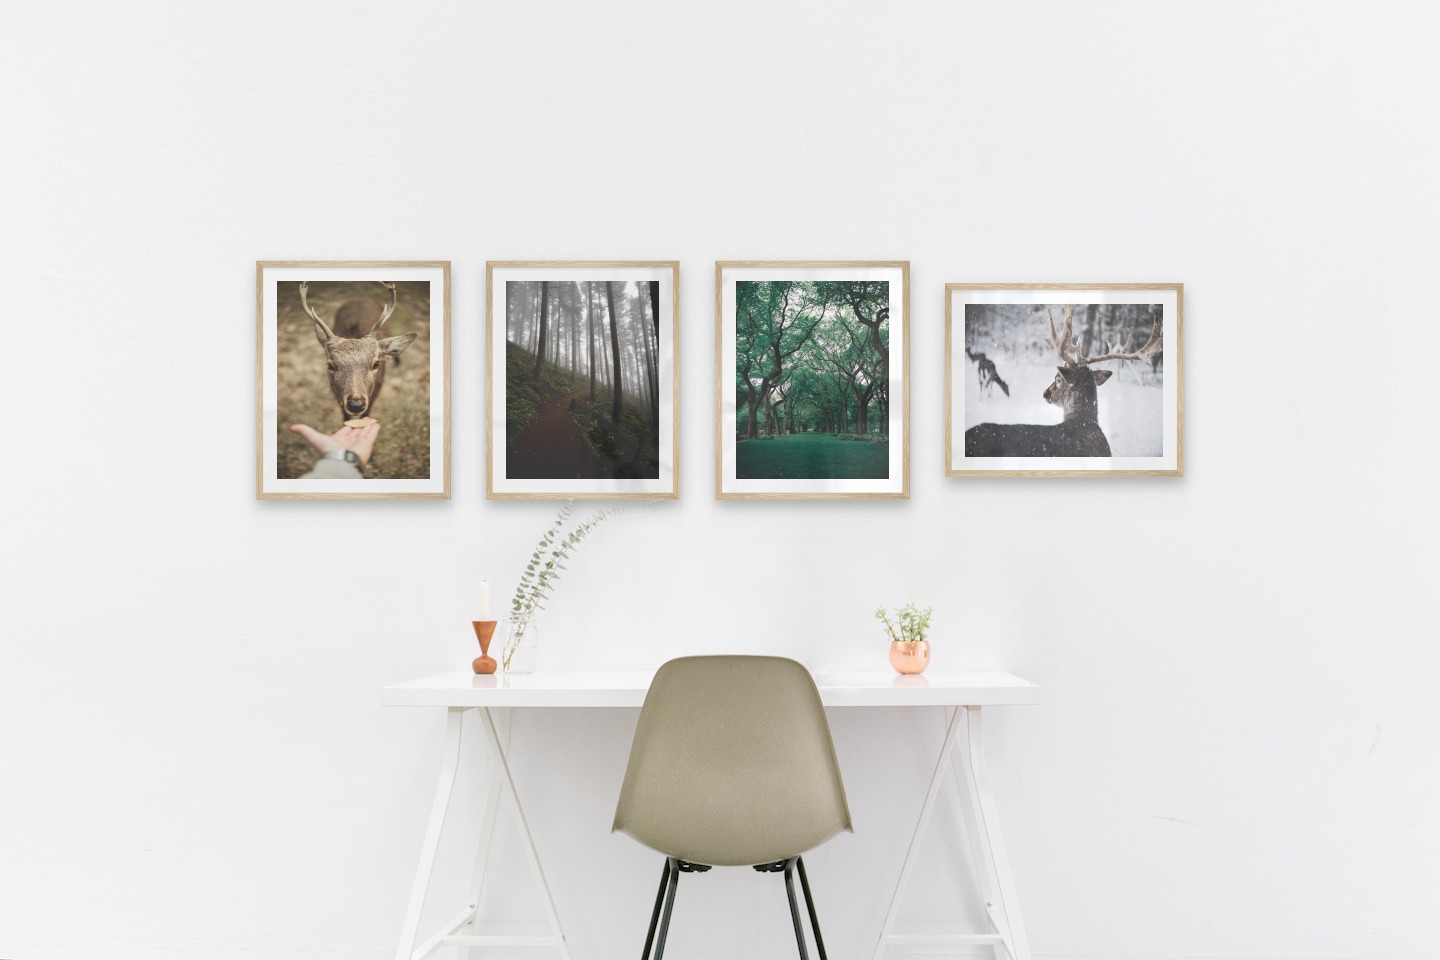 Gallery wall with picture frames in wood in sizes 40x50 with prints "Feed a deer", "Forest road", "Greenery and trees" and "Deer in the snow"